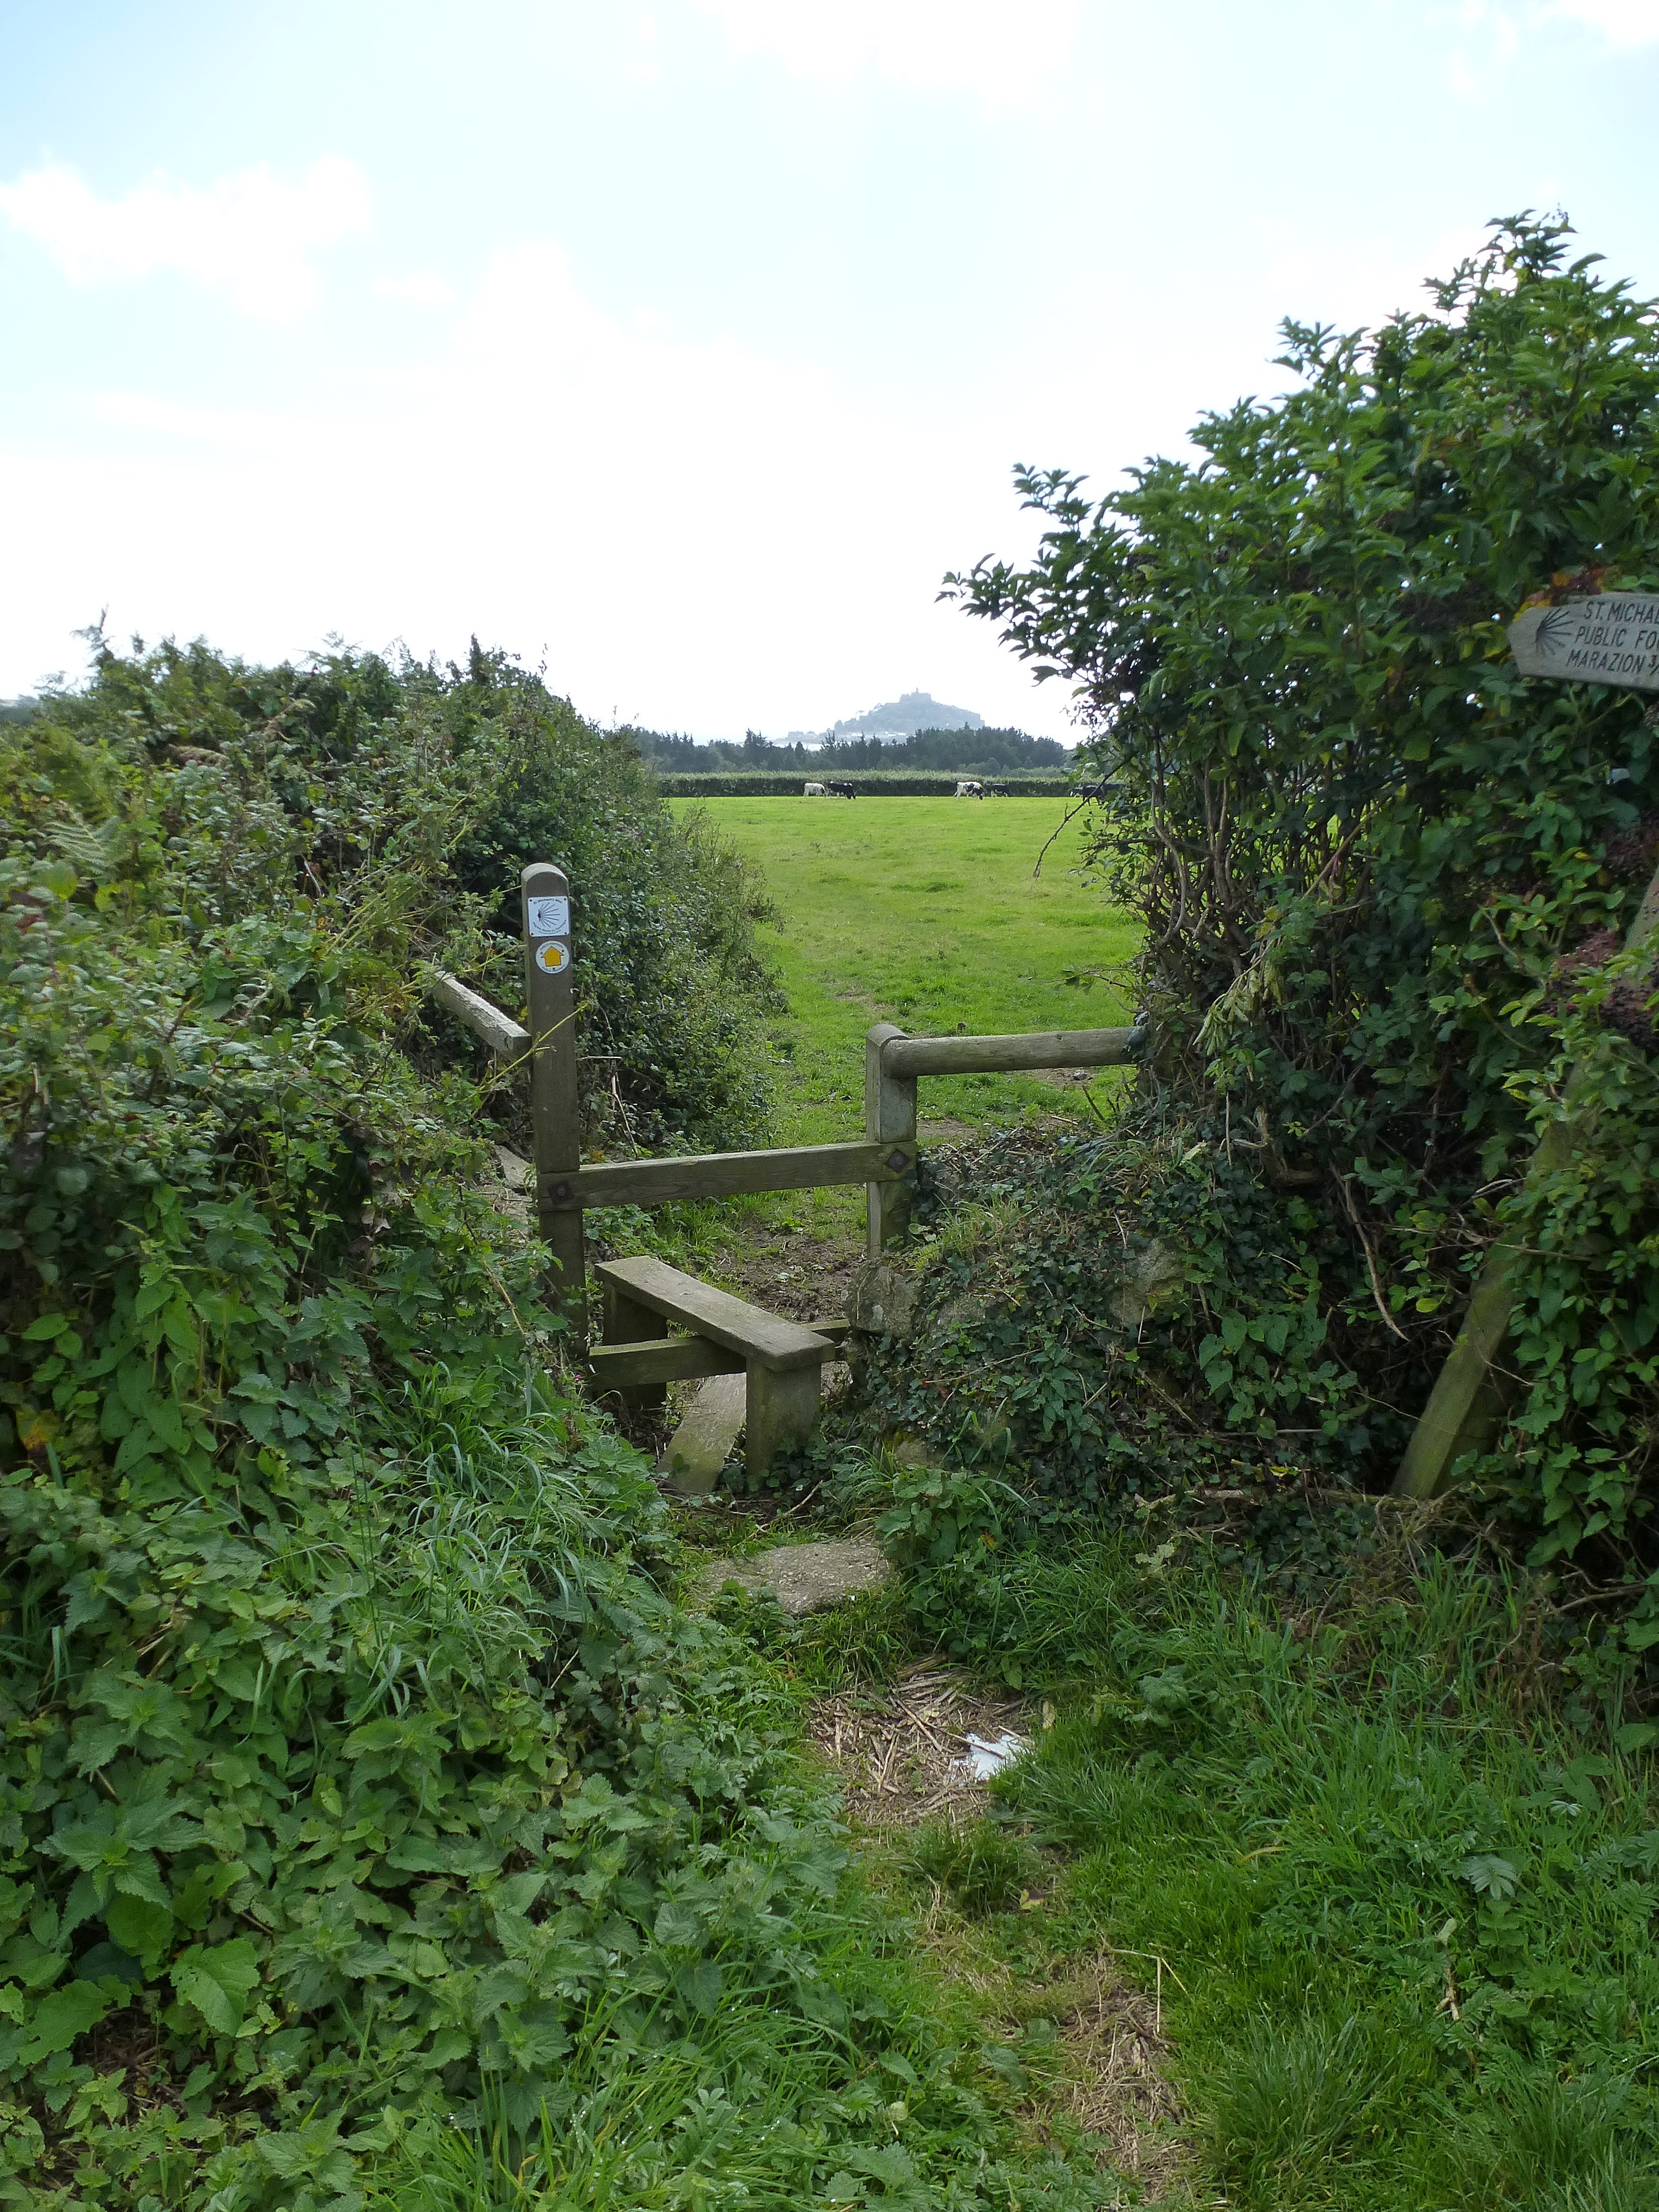 File:2 angled step wooden stile. - panoramio.jpg - Wikimedia Commons